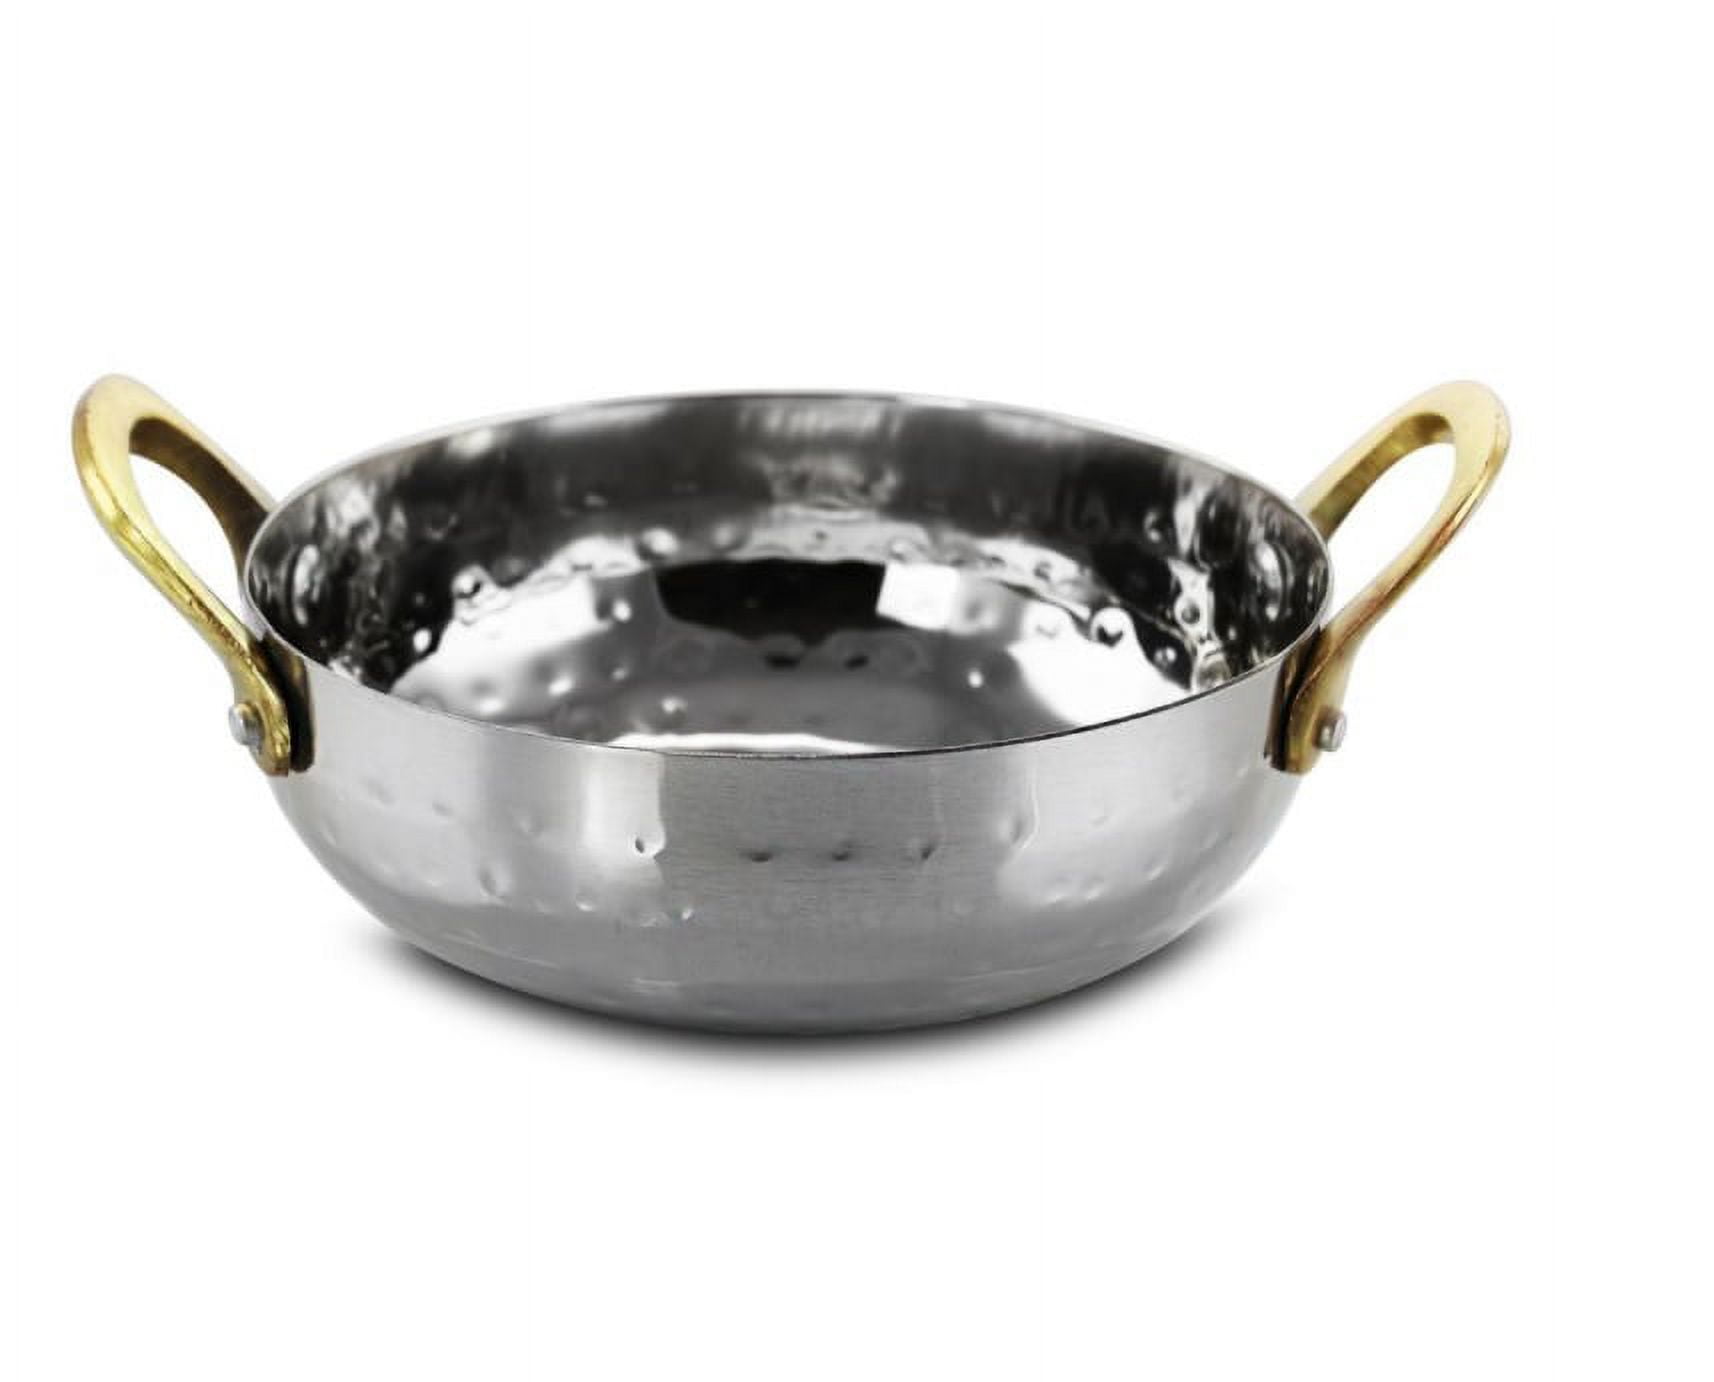 Hammered Stainless Steel Mini Sauce Pan with Brass Handles 5.5 oz.